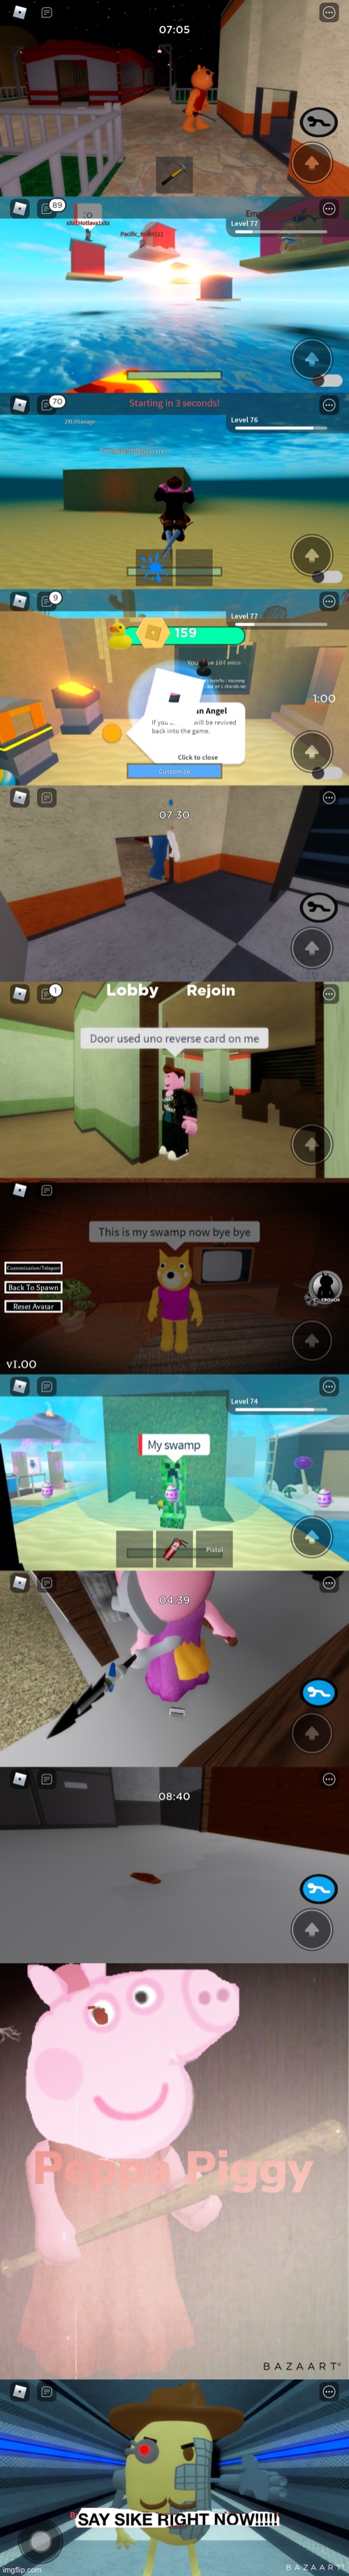 Extremely Cursed Roblox Pictures I Took While Playing Roblox Imgflip - cursed roblox imgflip